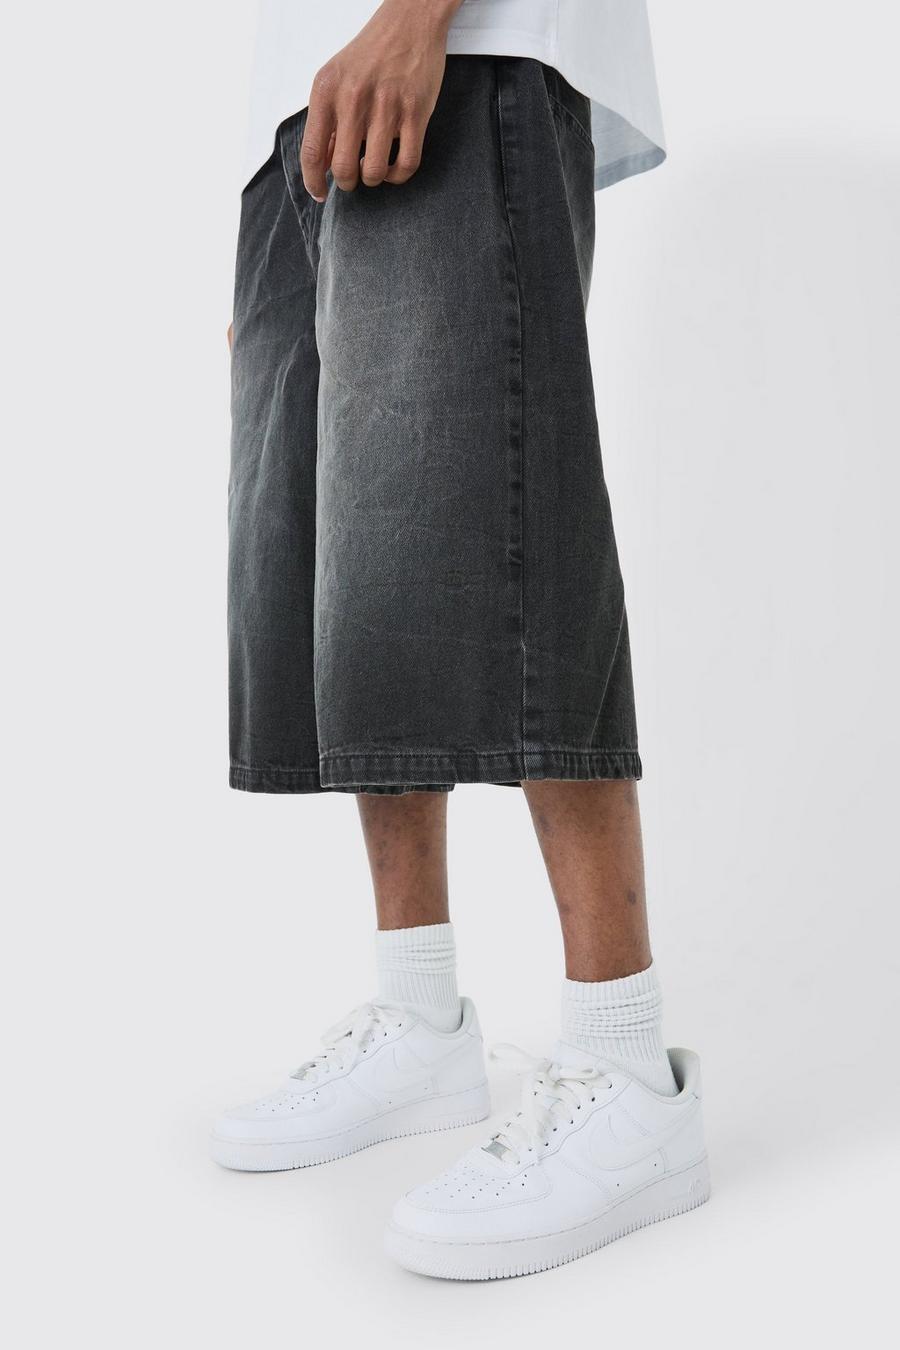 Tall Jeansshorts in Schwarz, Washed black